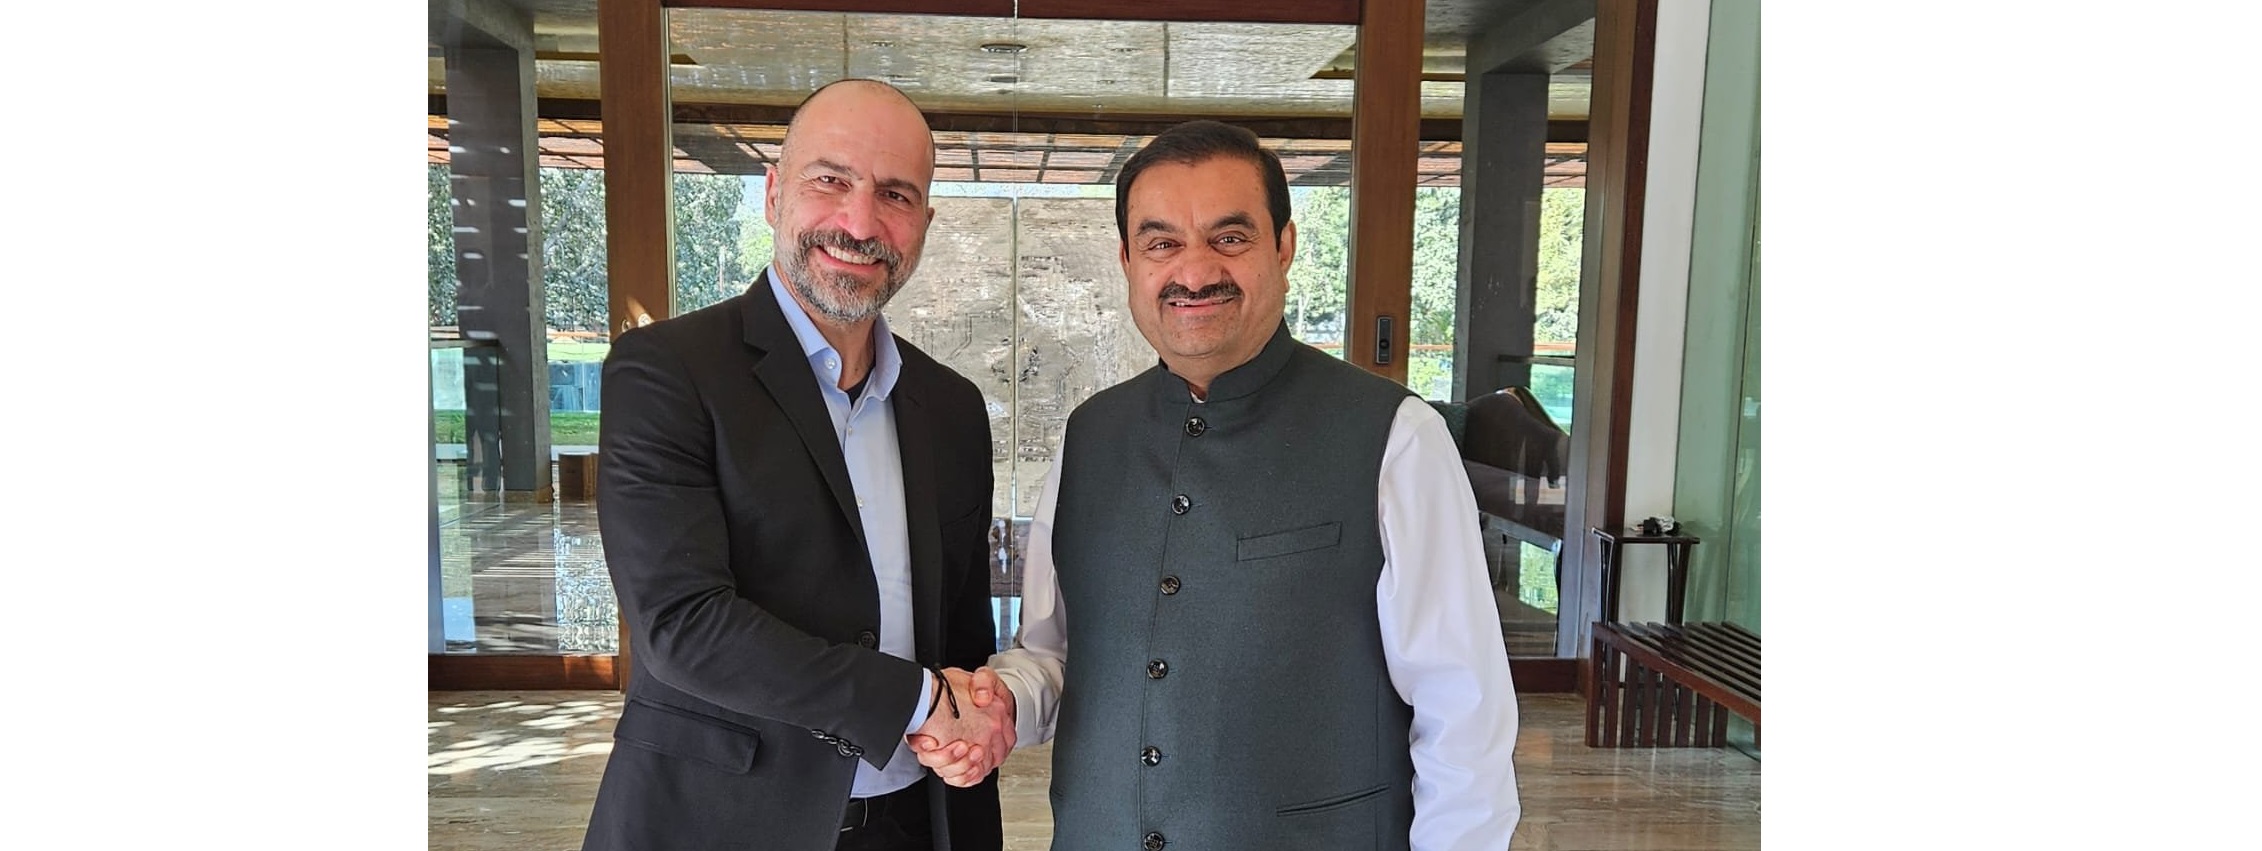 Adani Group Chairman meets Uber CEO, collaboration speculated